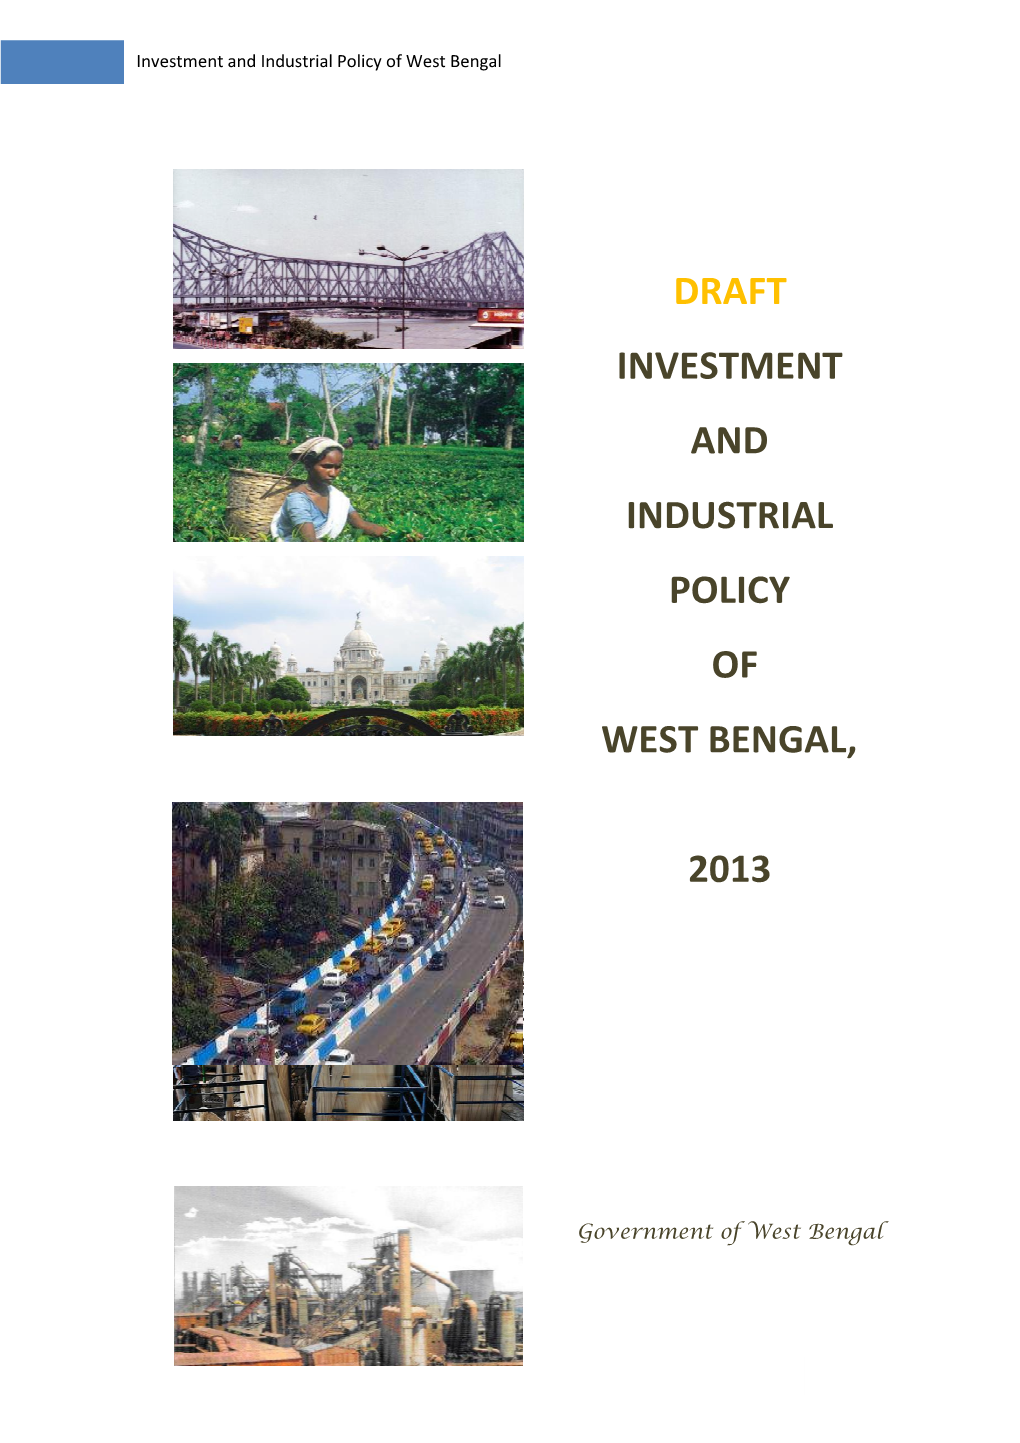 Draft Investment and Industrial Policy of West